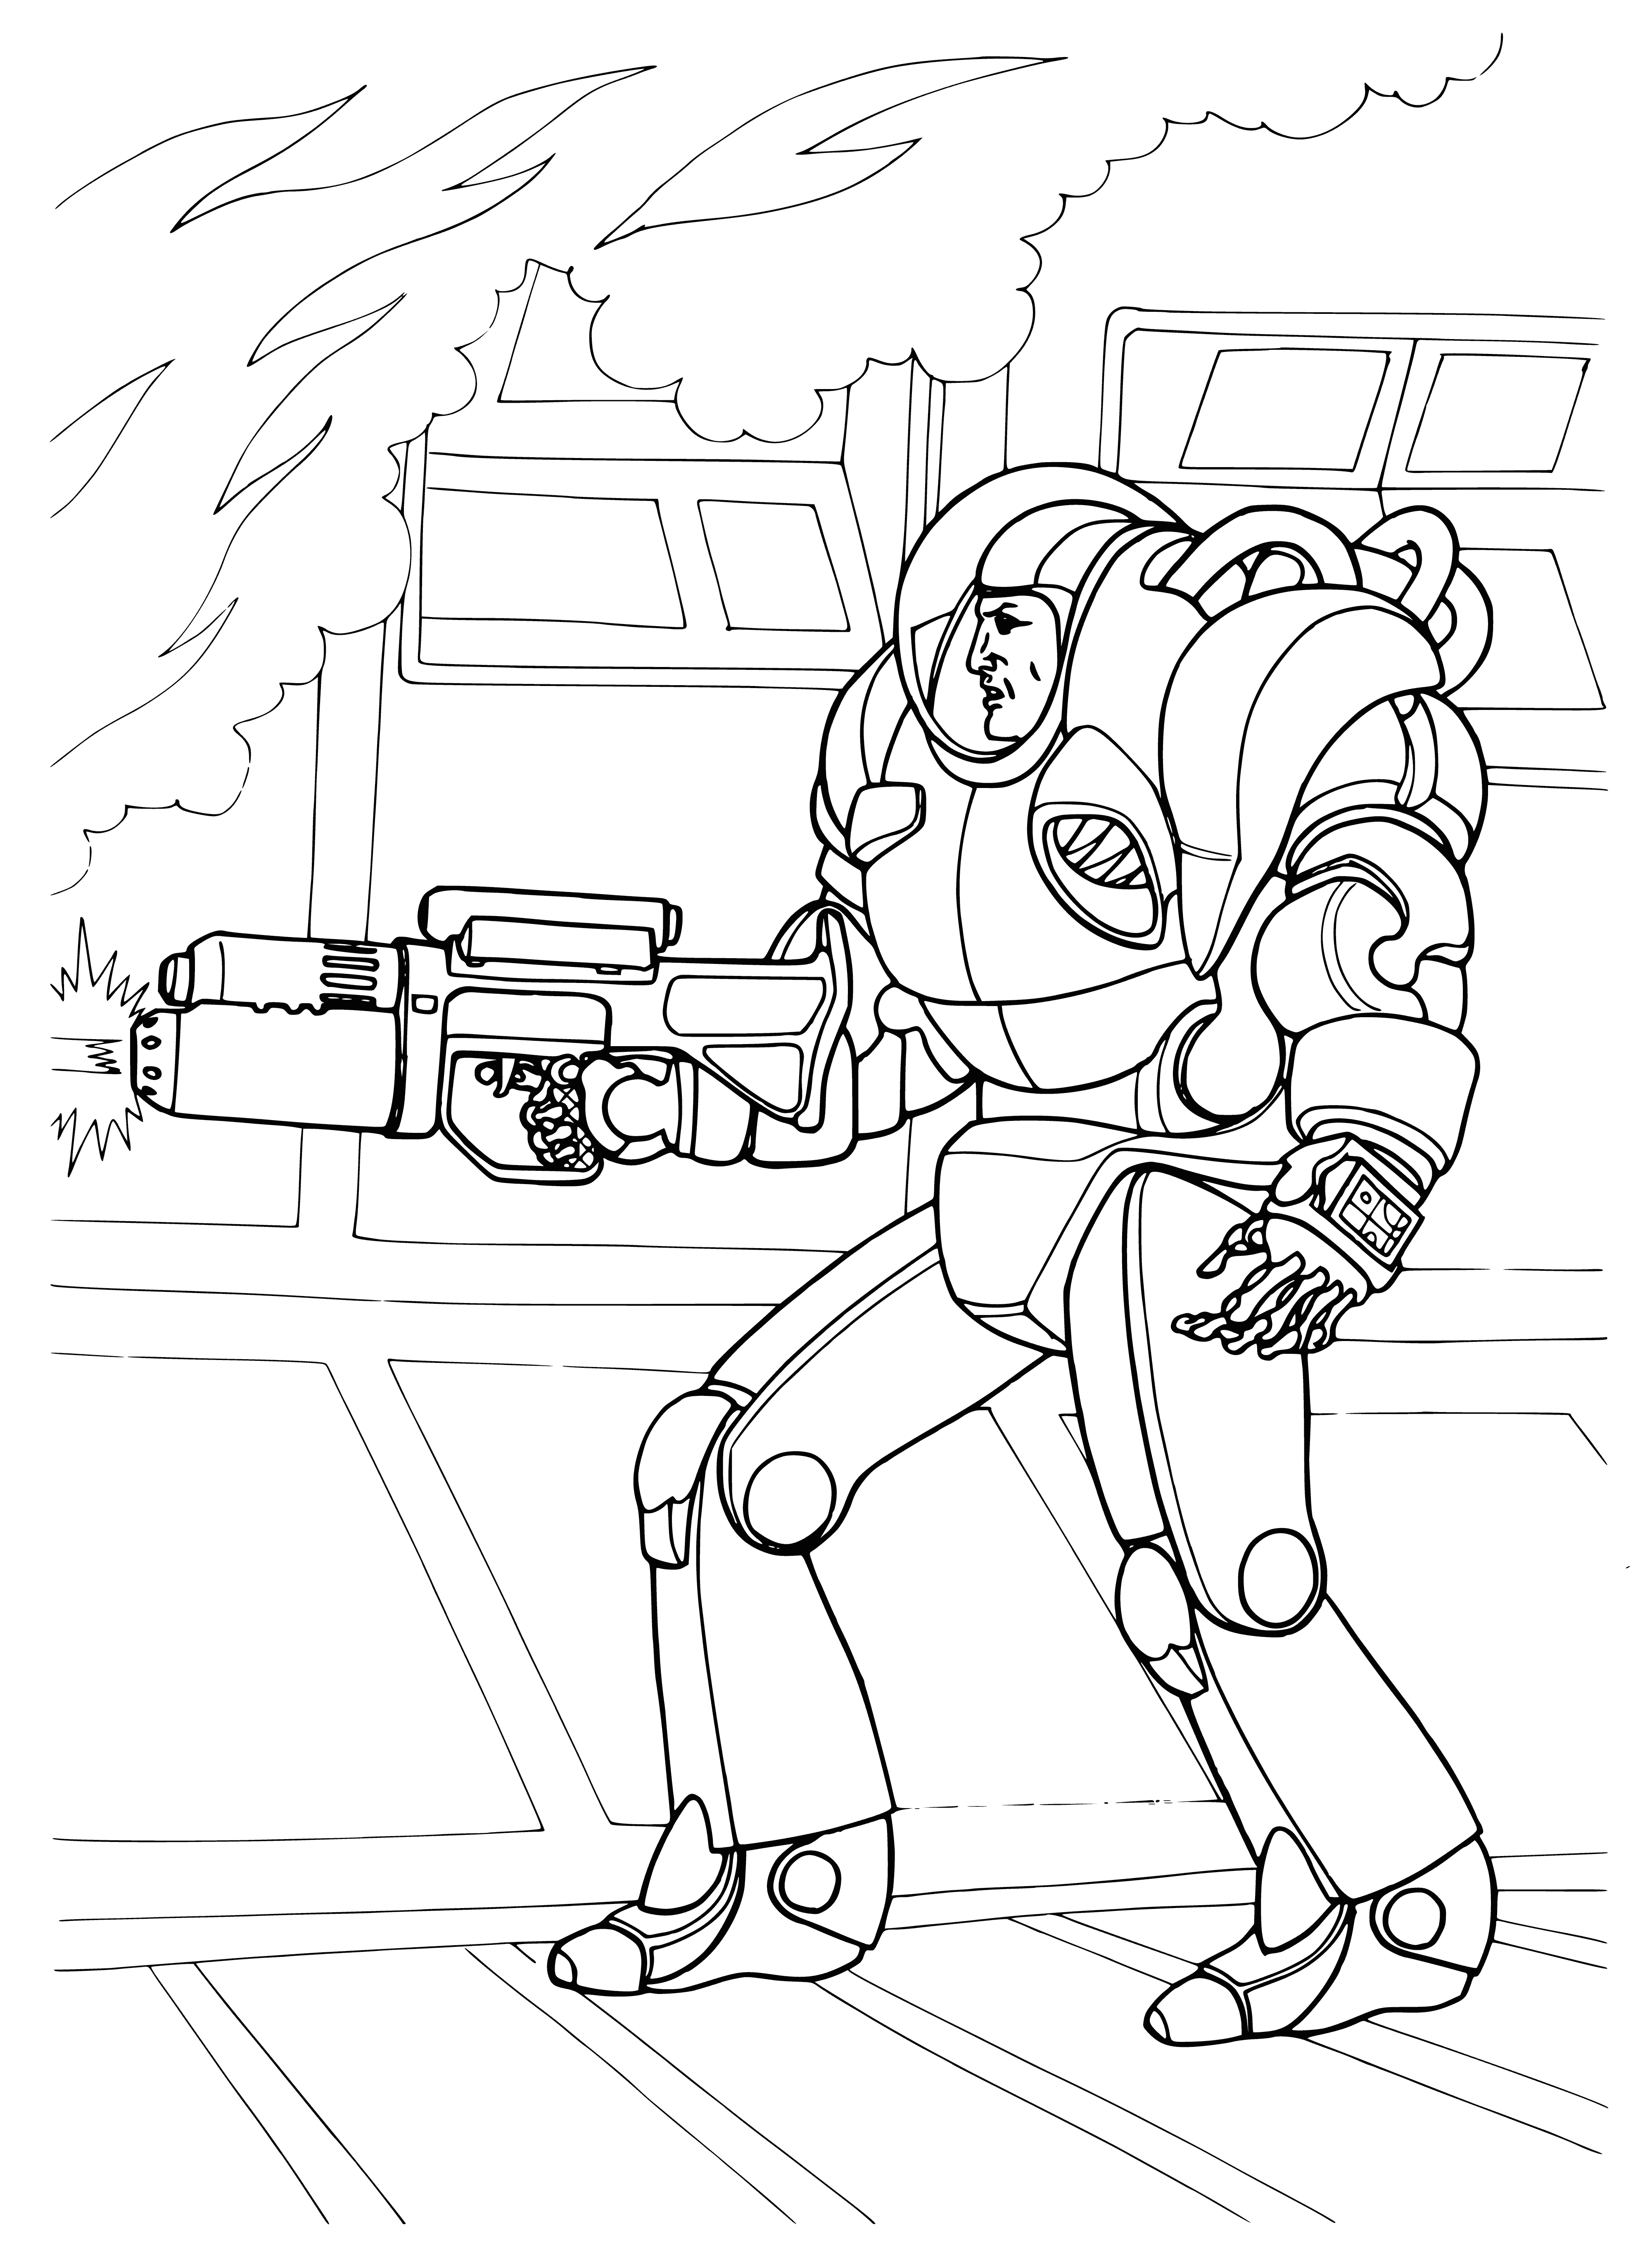 Private coloring page